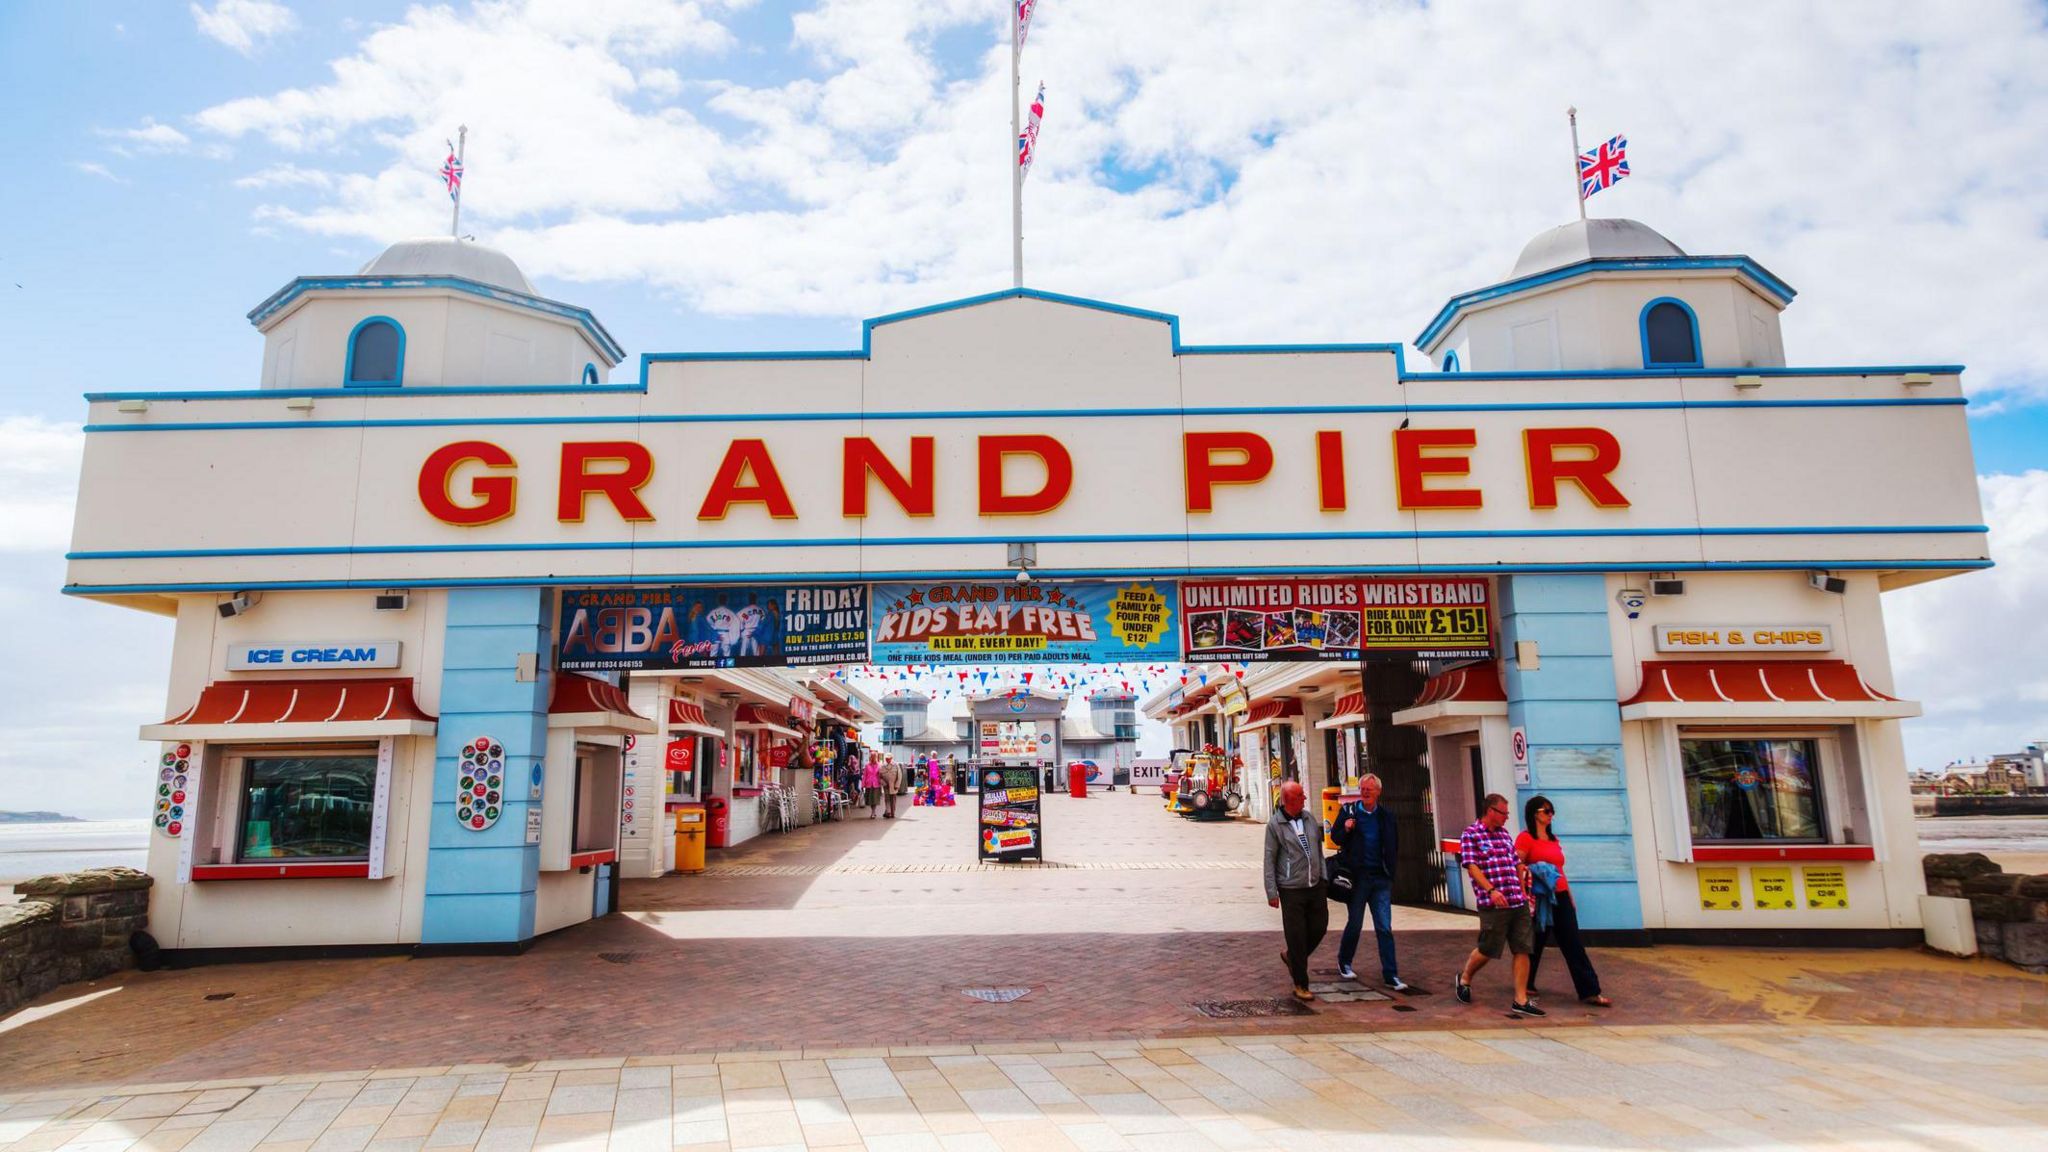 The Grand Pier entrance with people walking out and the sea in the background